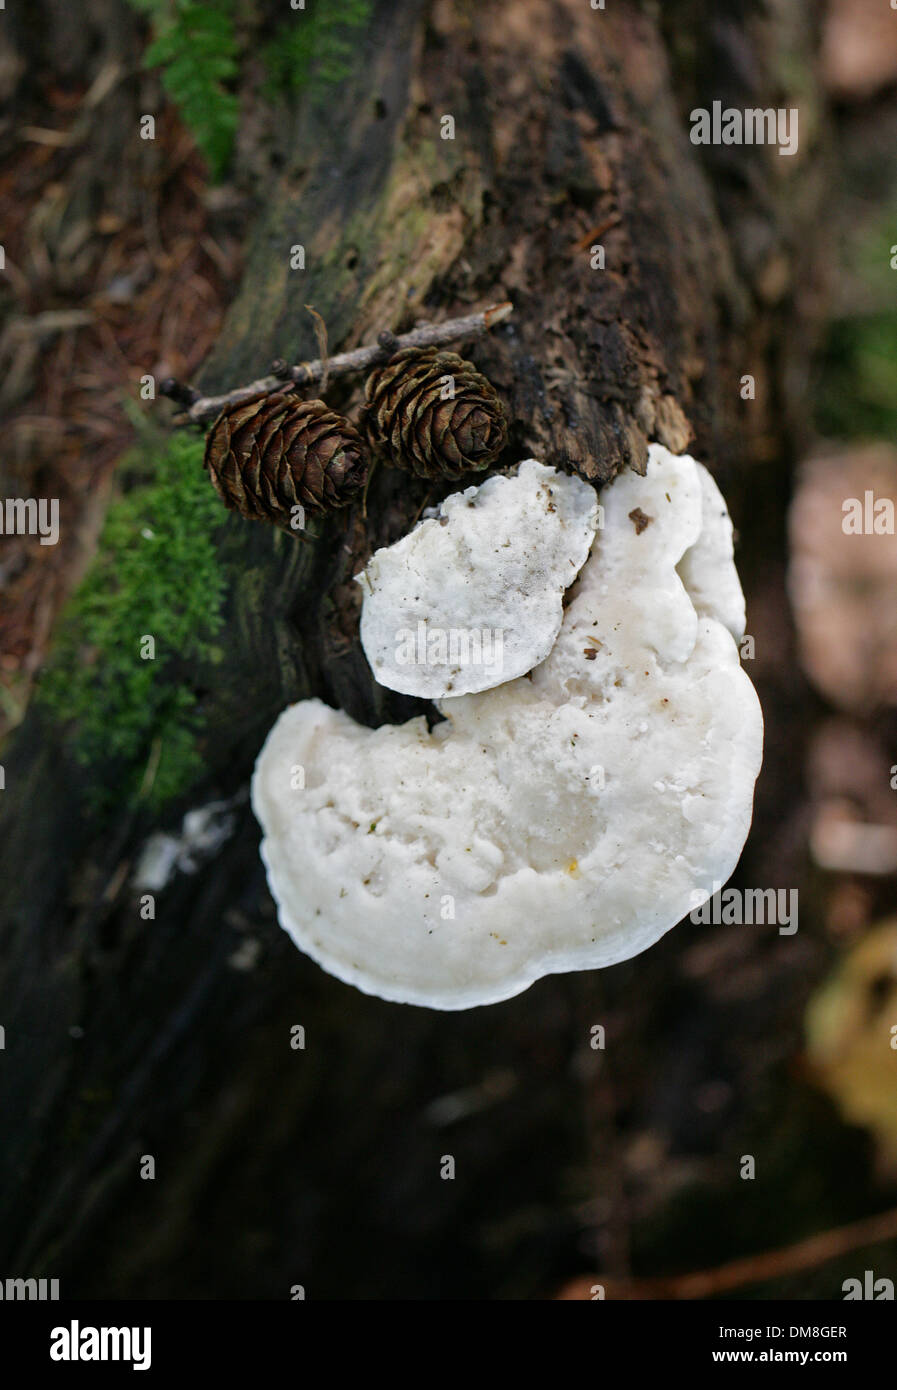 Bitter Bracket, Postia stiptica, Fomitopsidaceae, Syn. Tyromyces stipticus. A White Bracket Fungus that Grows on Dead Conifers. Stock Photo